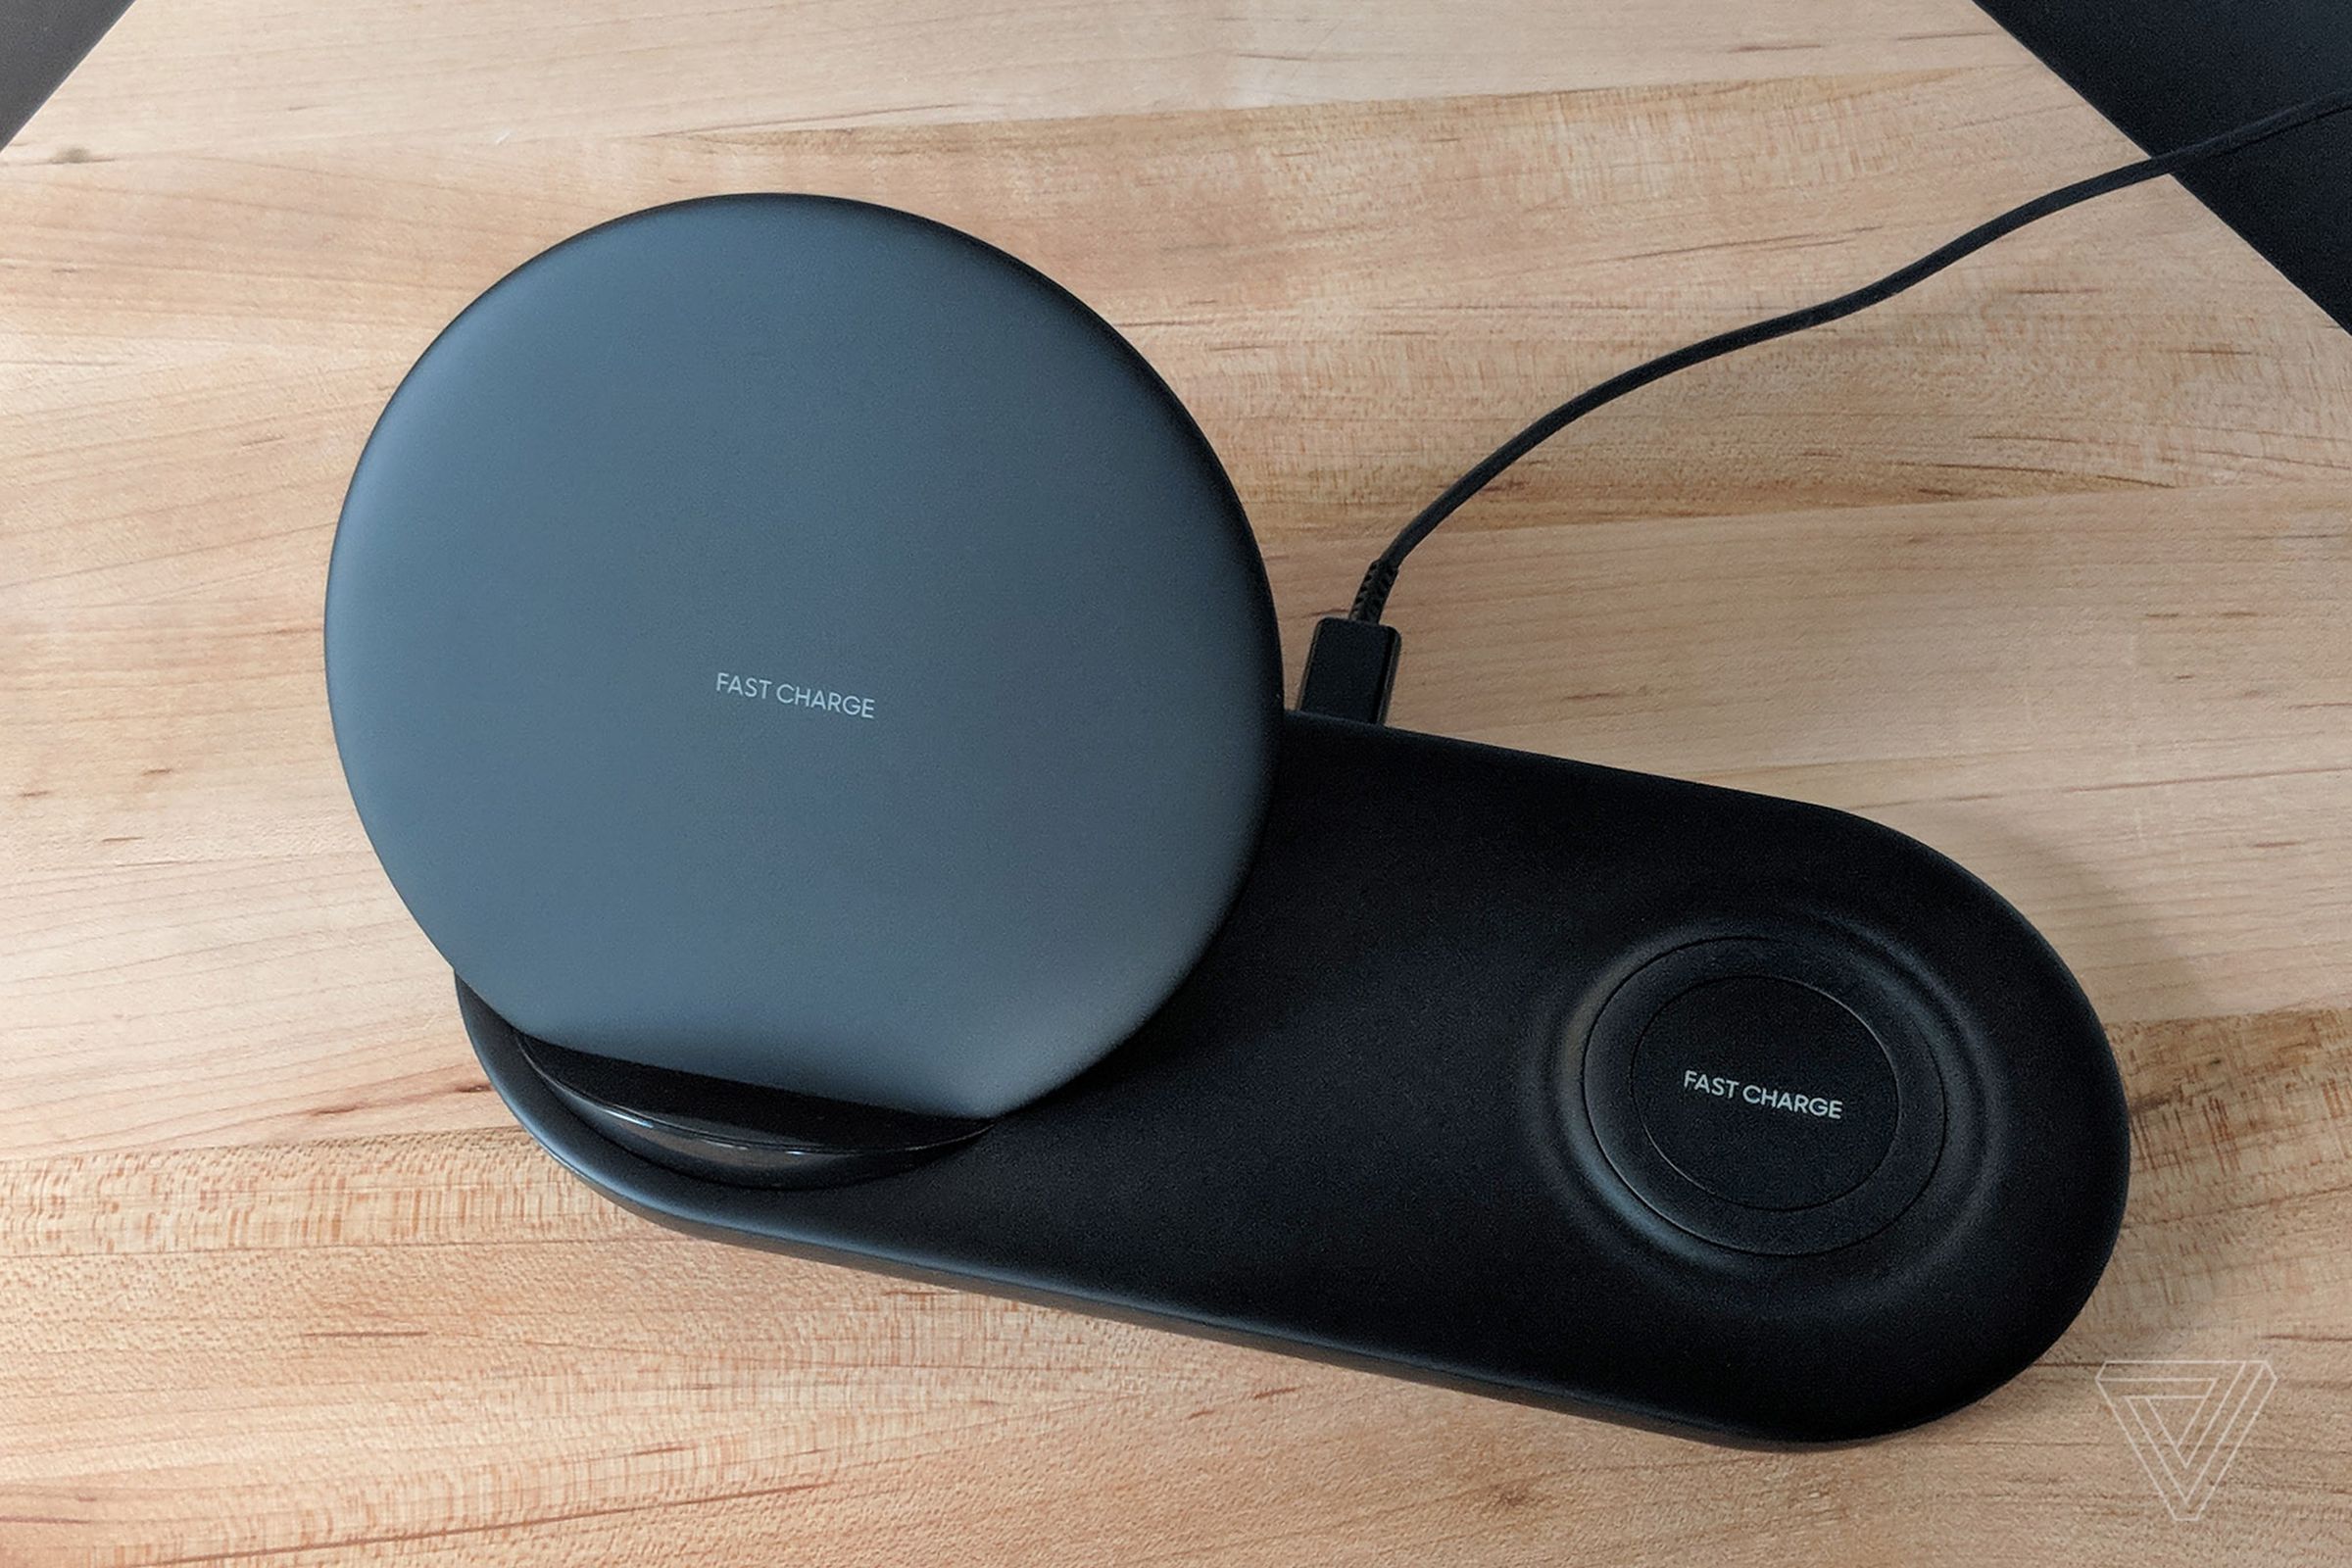 The Samsung Wireless Charger Duo